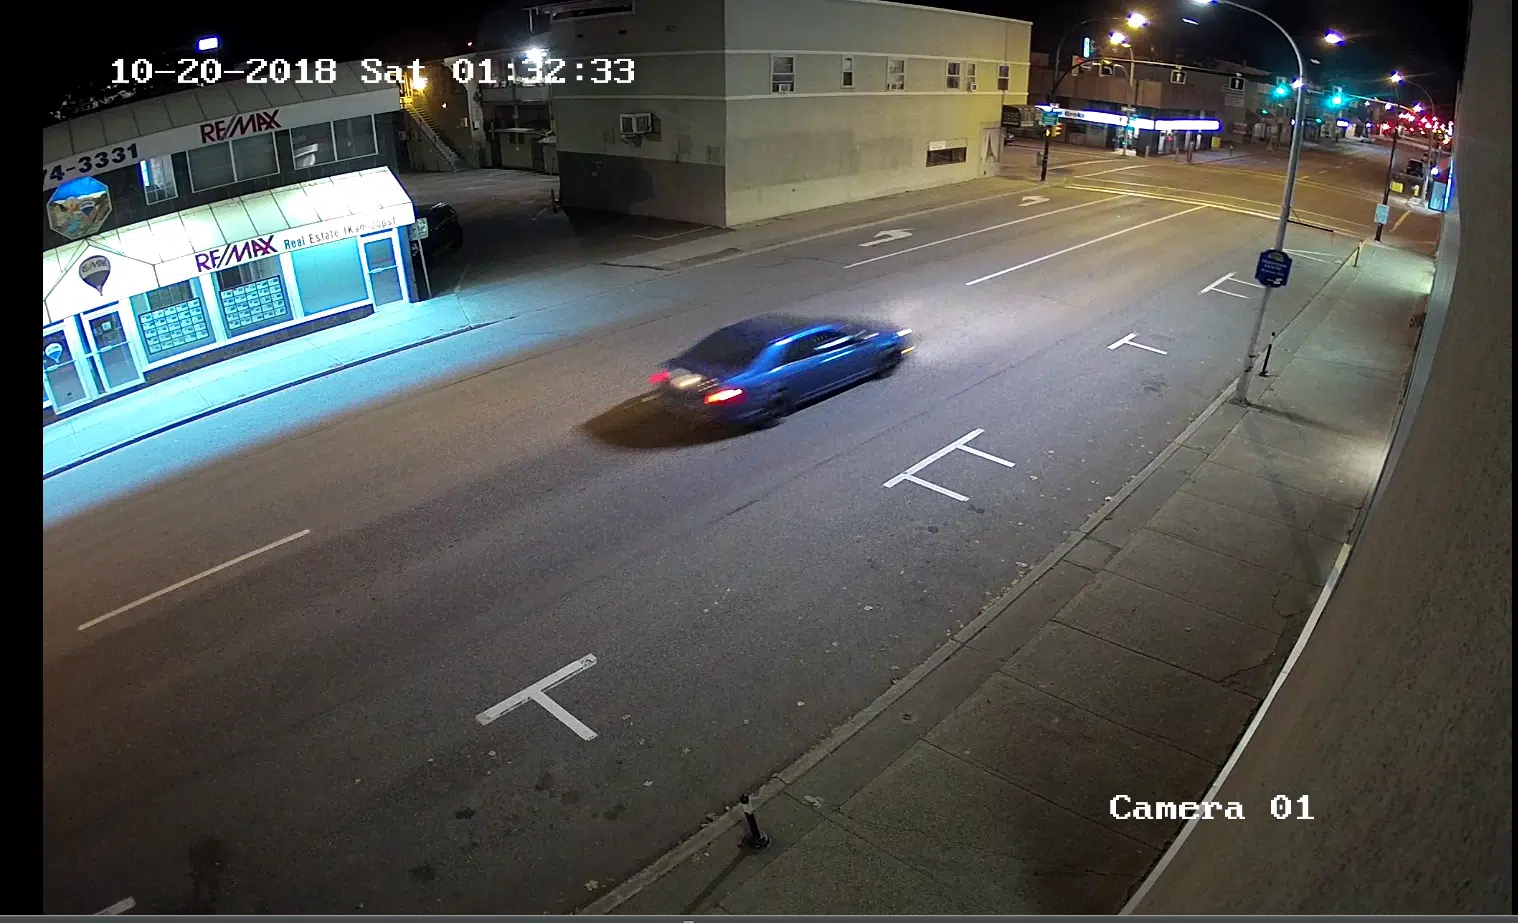 New Vehicle Sought in Hit and Run Case